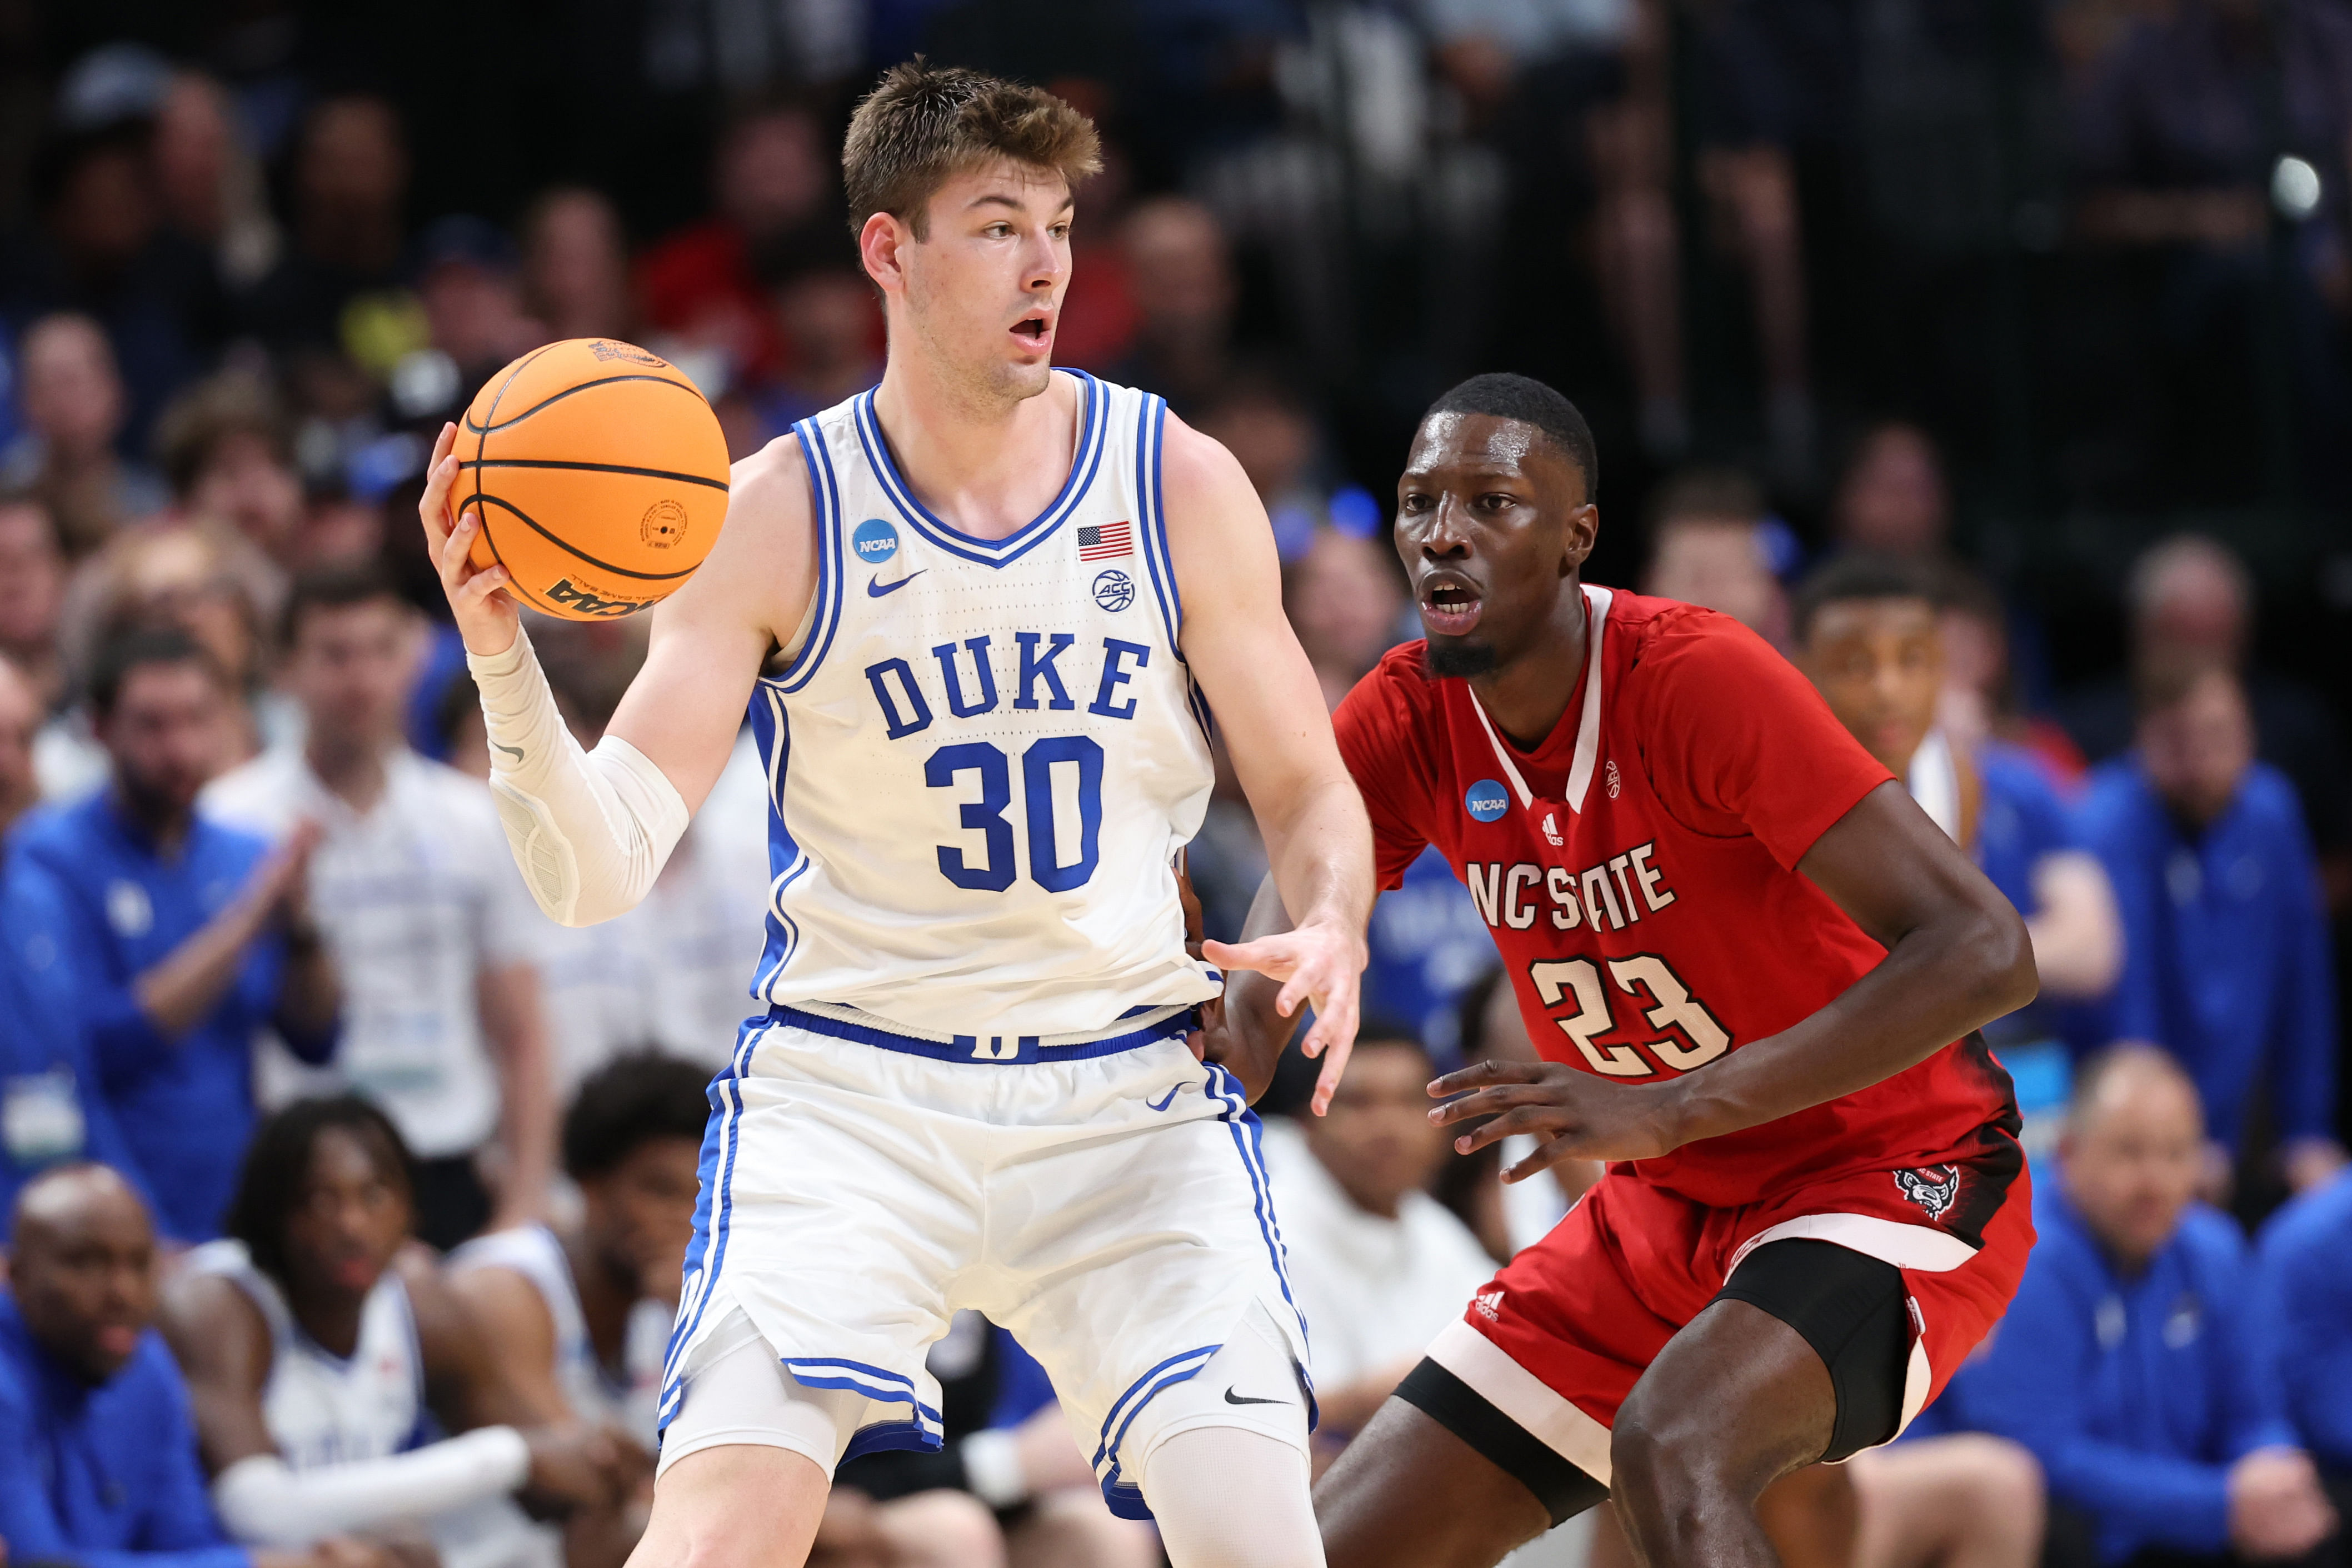 Kyle Filipowski declared himself for the draft after an excellent sophomore season with Duke, where he averaged 16.3 points and 8.3 rebounds per game.